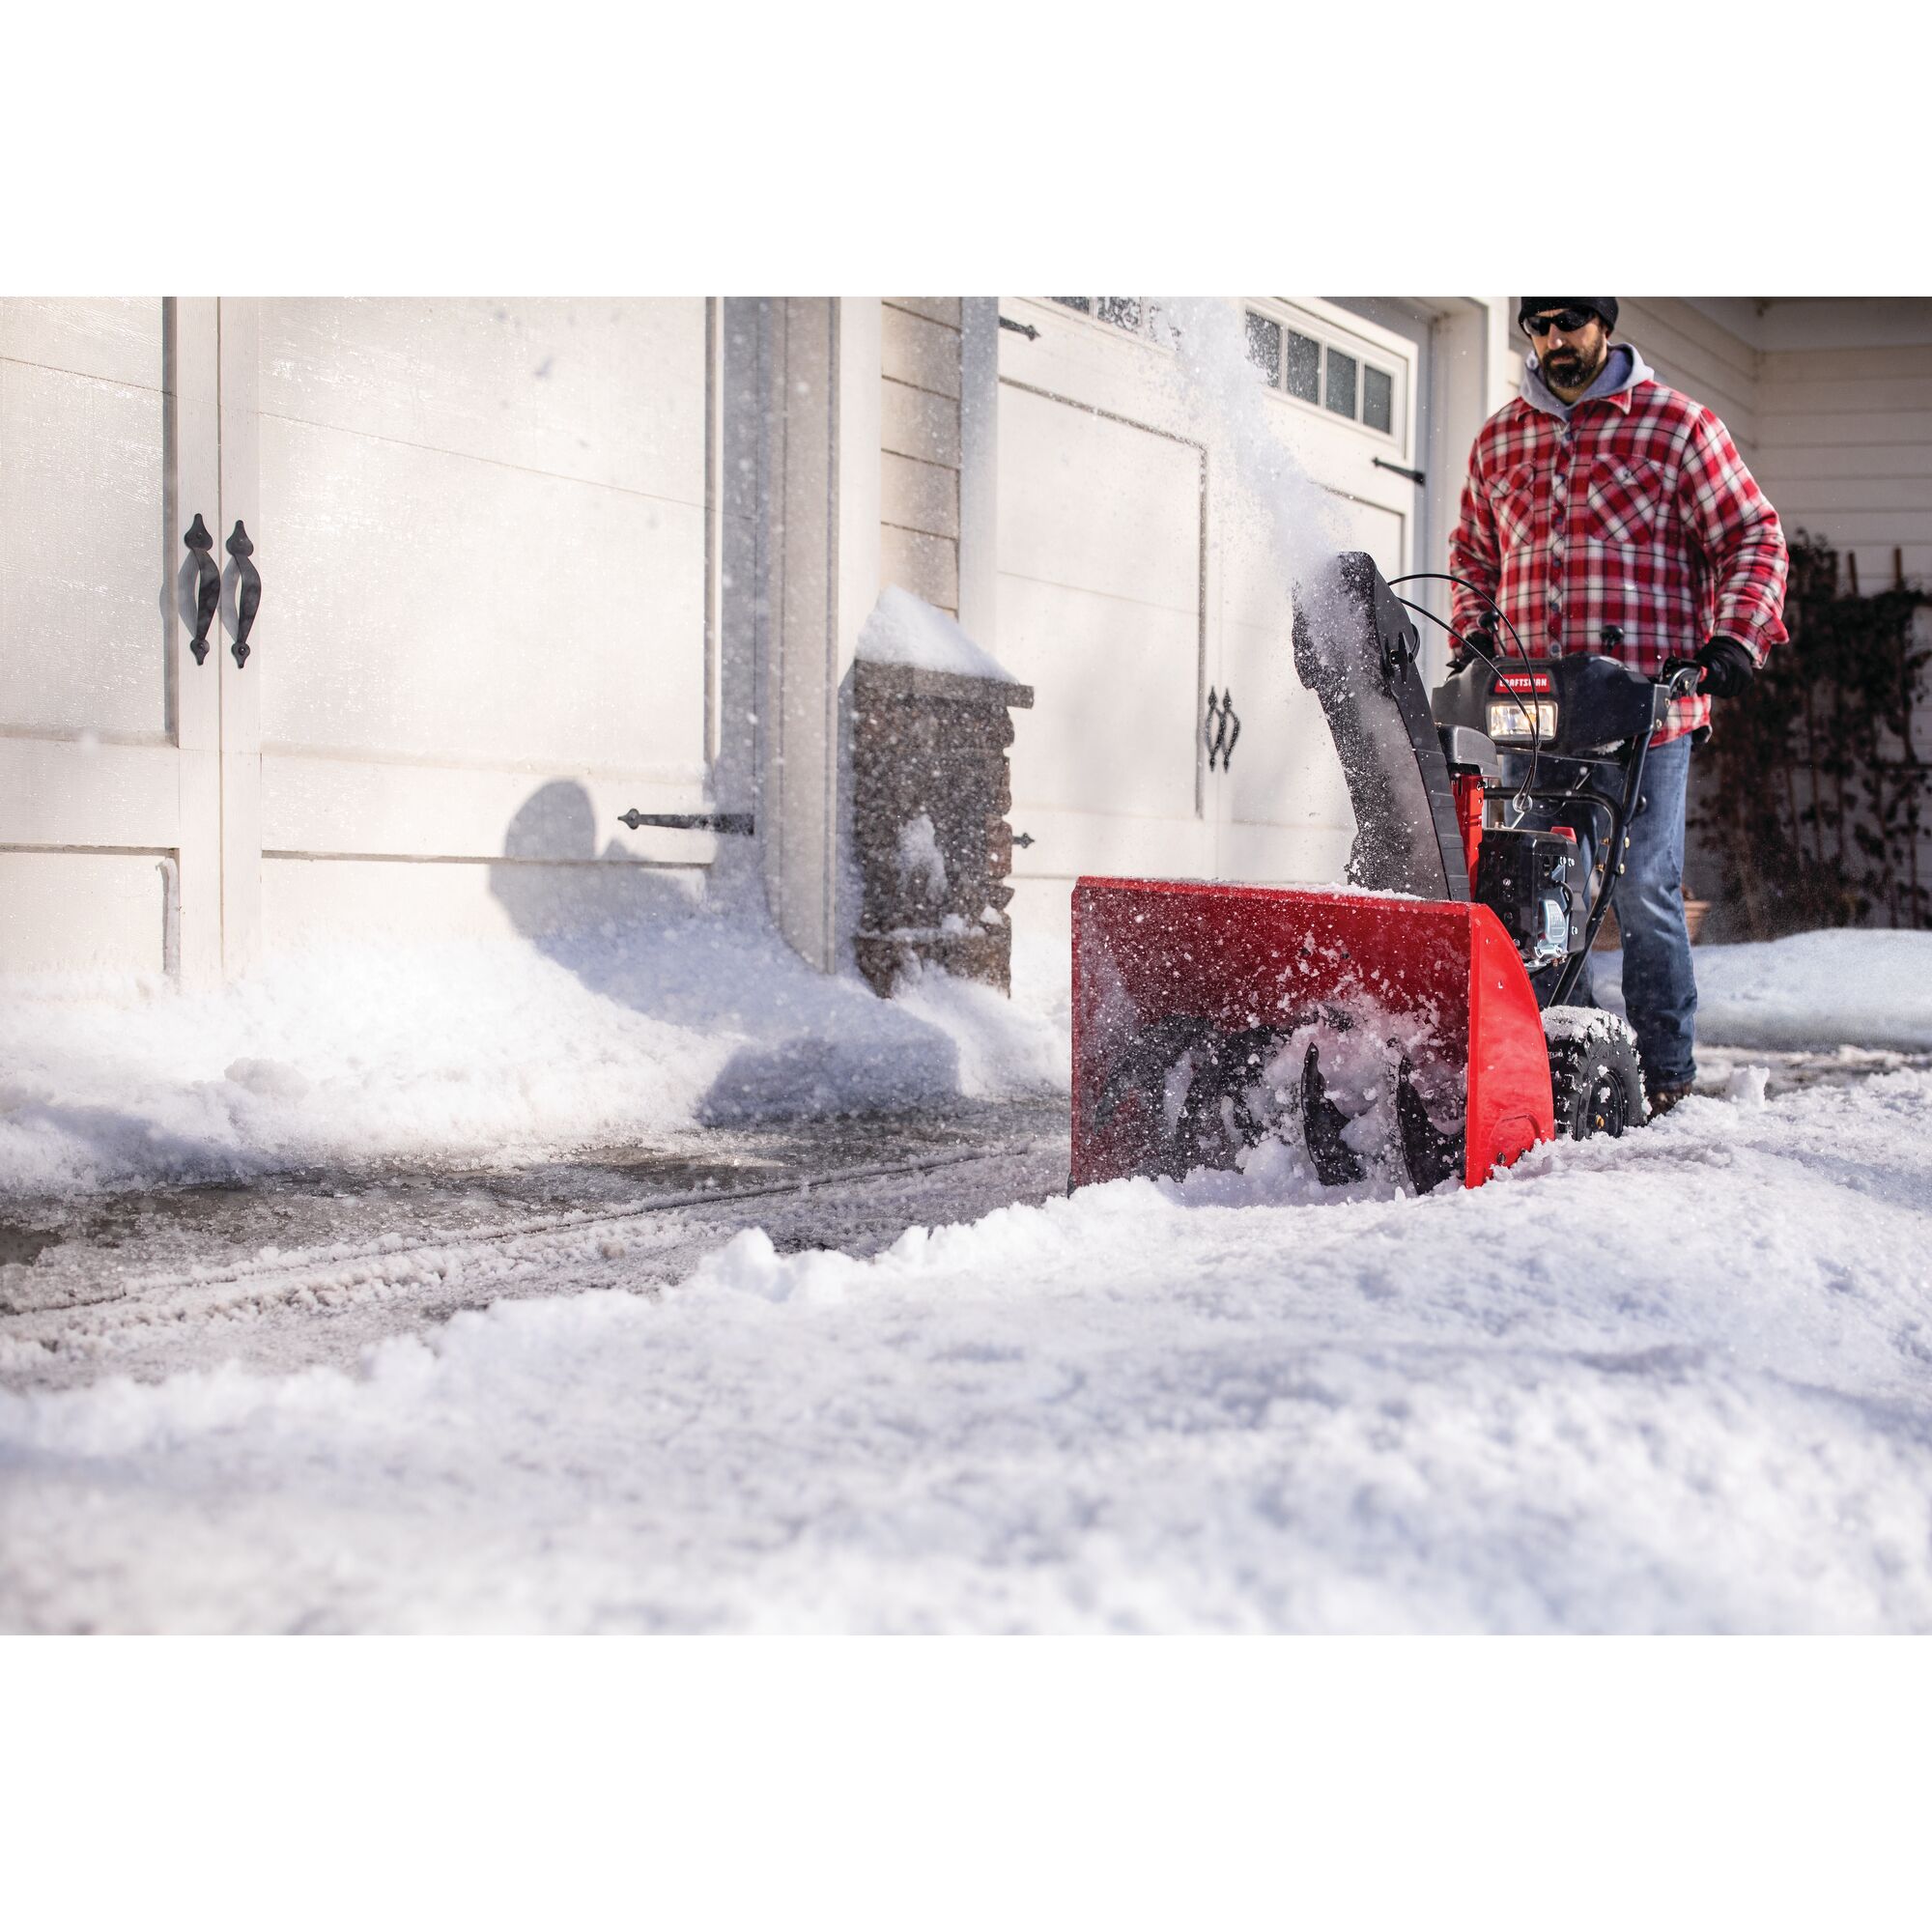 CRAFTSMAN B 28-in 243cc Electric Start Snow Blower clearing snow in the driveway with plaid jacket